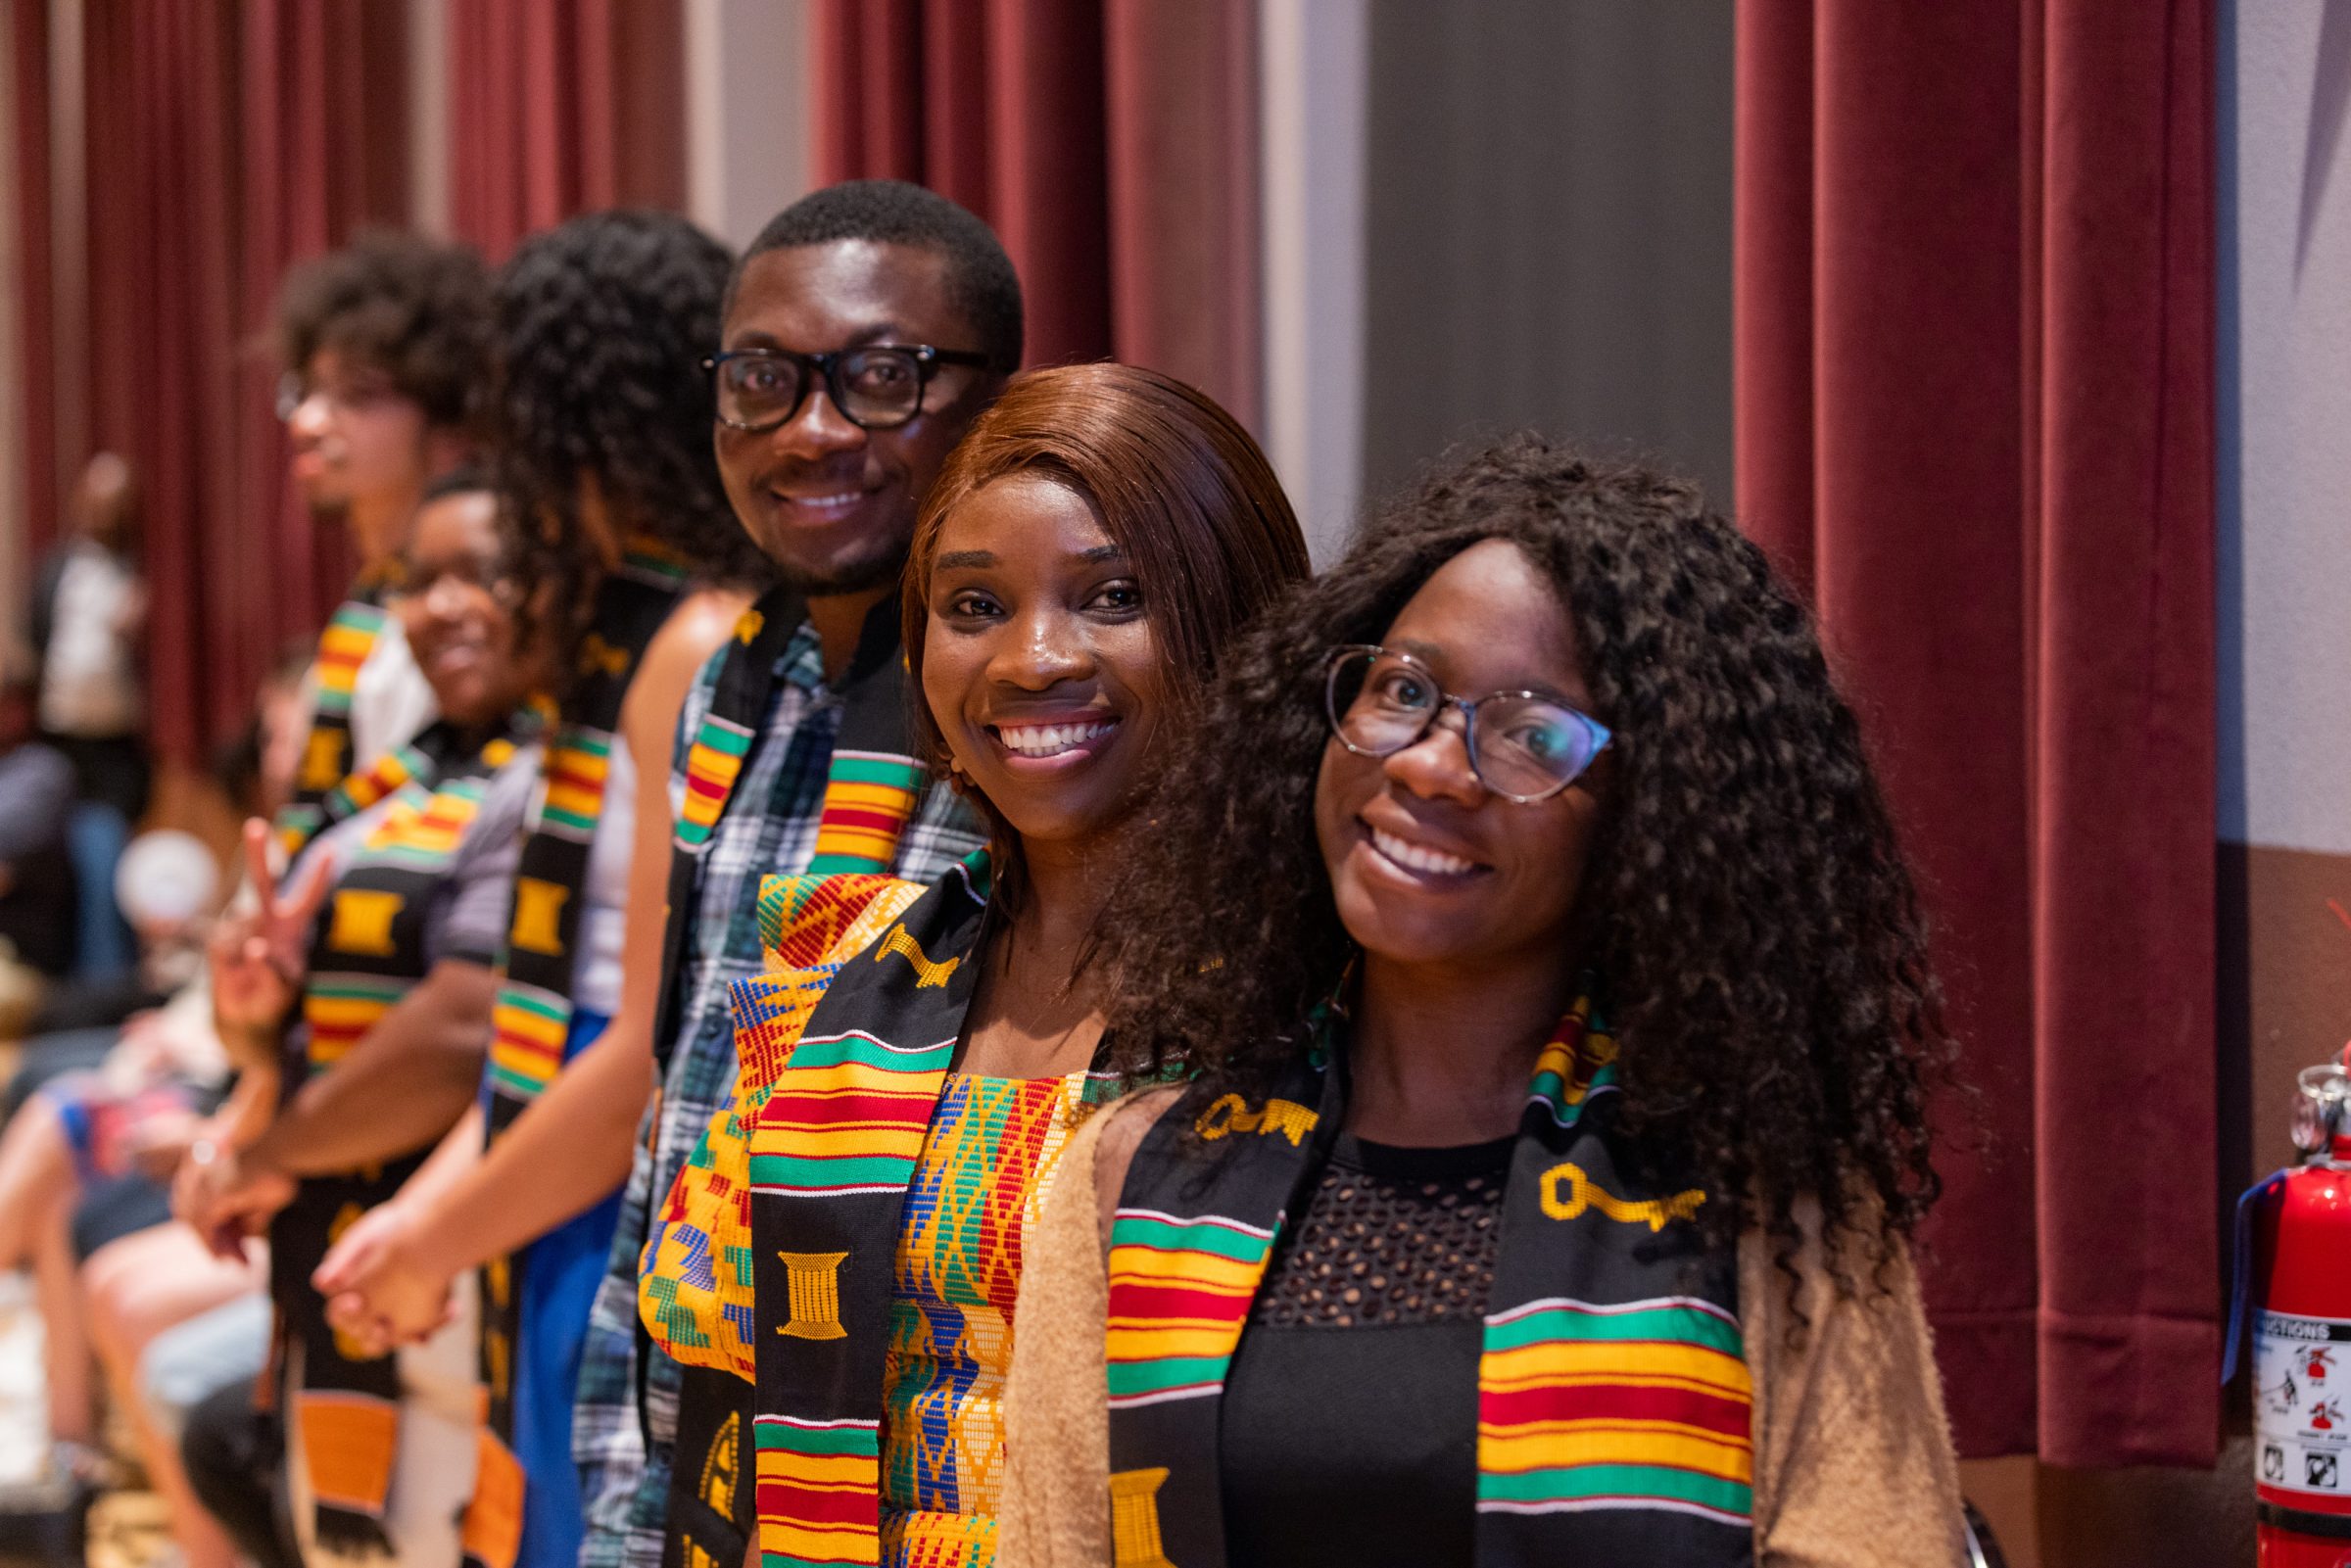 Students wearing colorful Black Convocation Awards stoles smile at the camera.